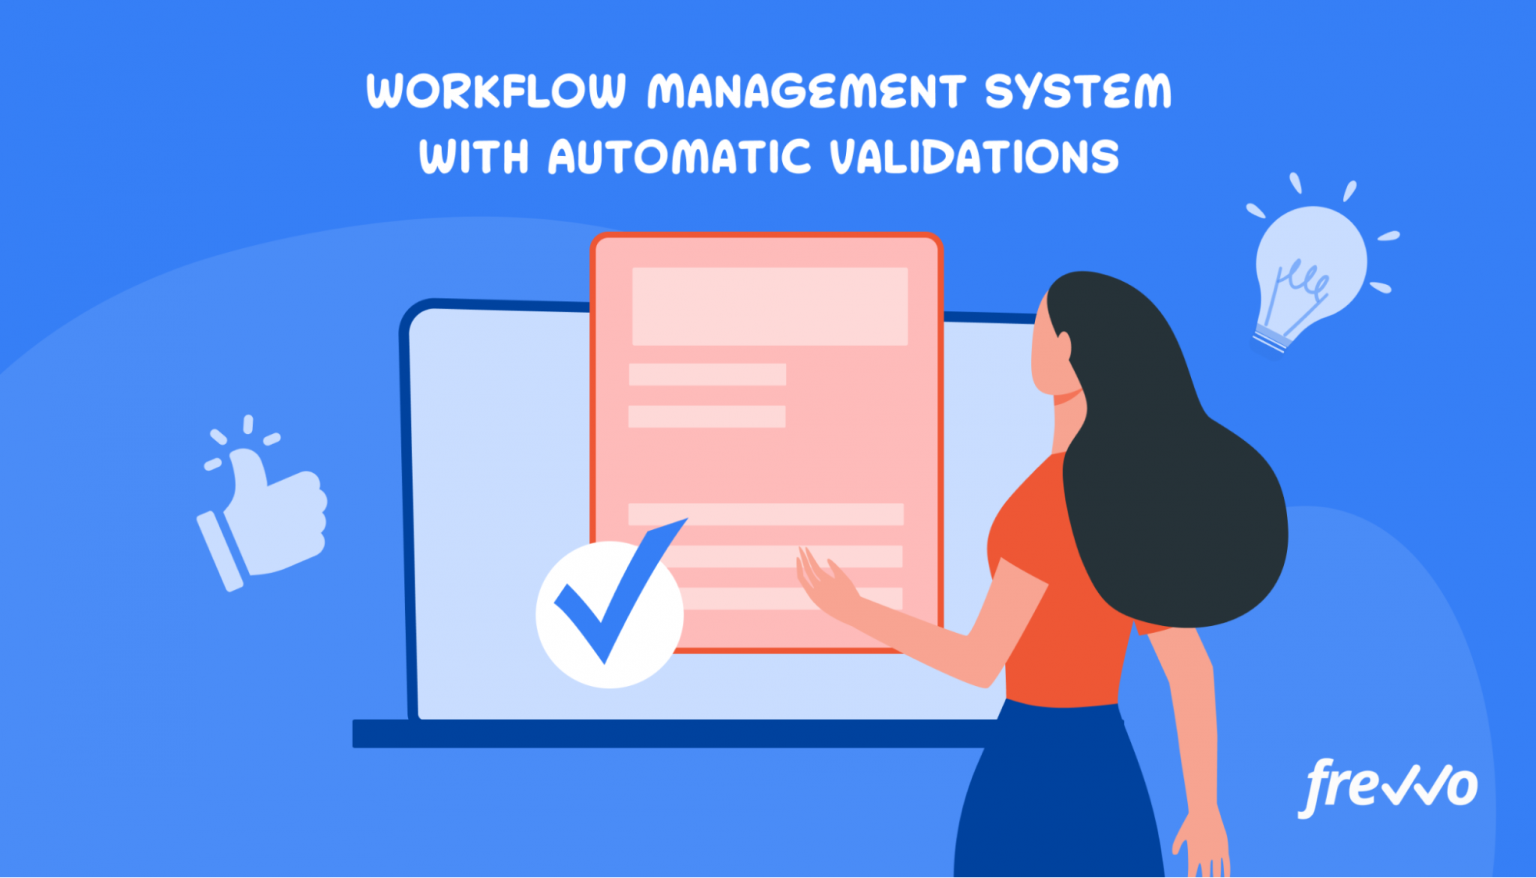 12 Essential Features Your Workflow Management System Needs 0963